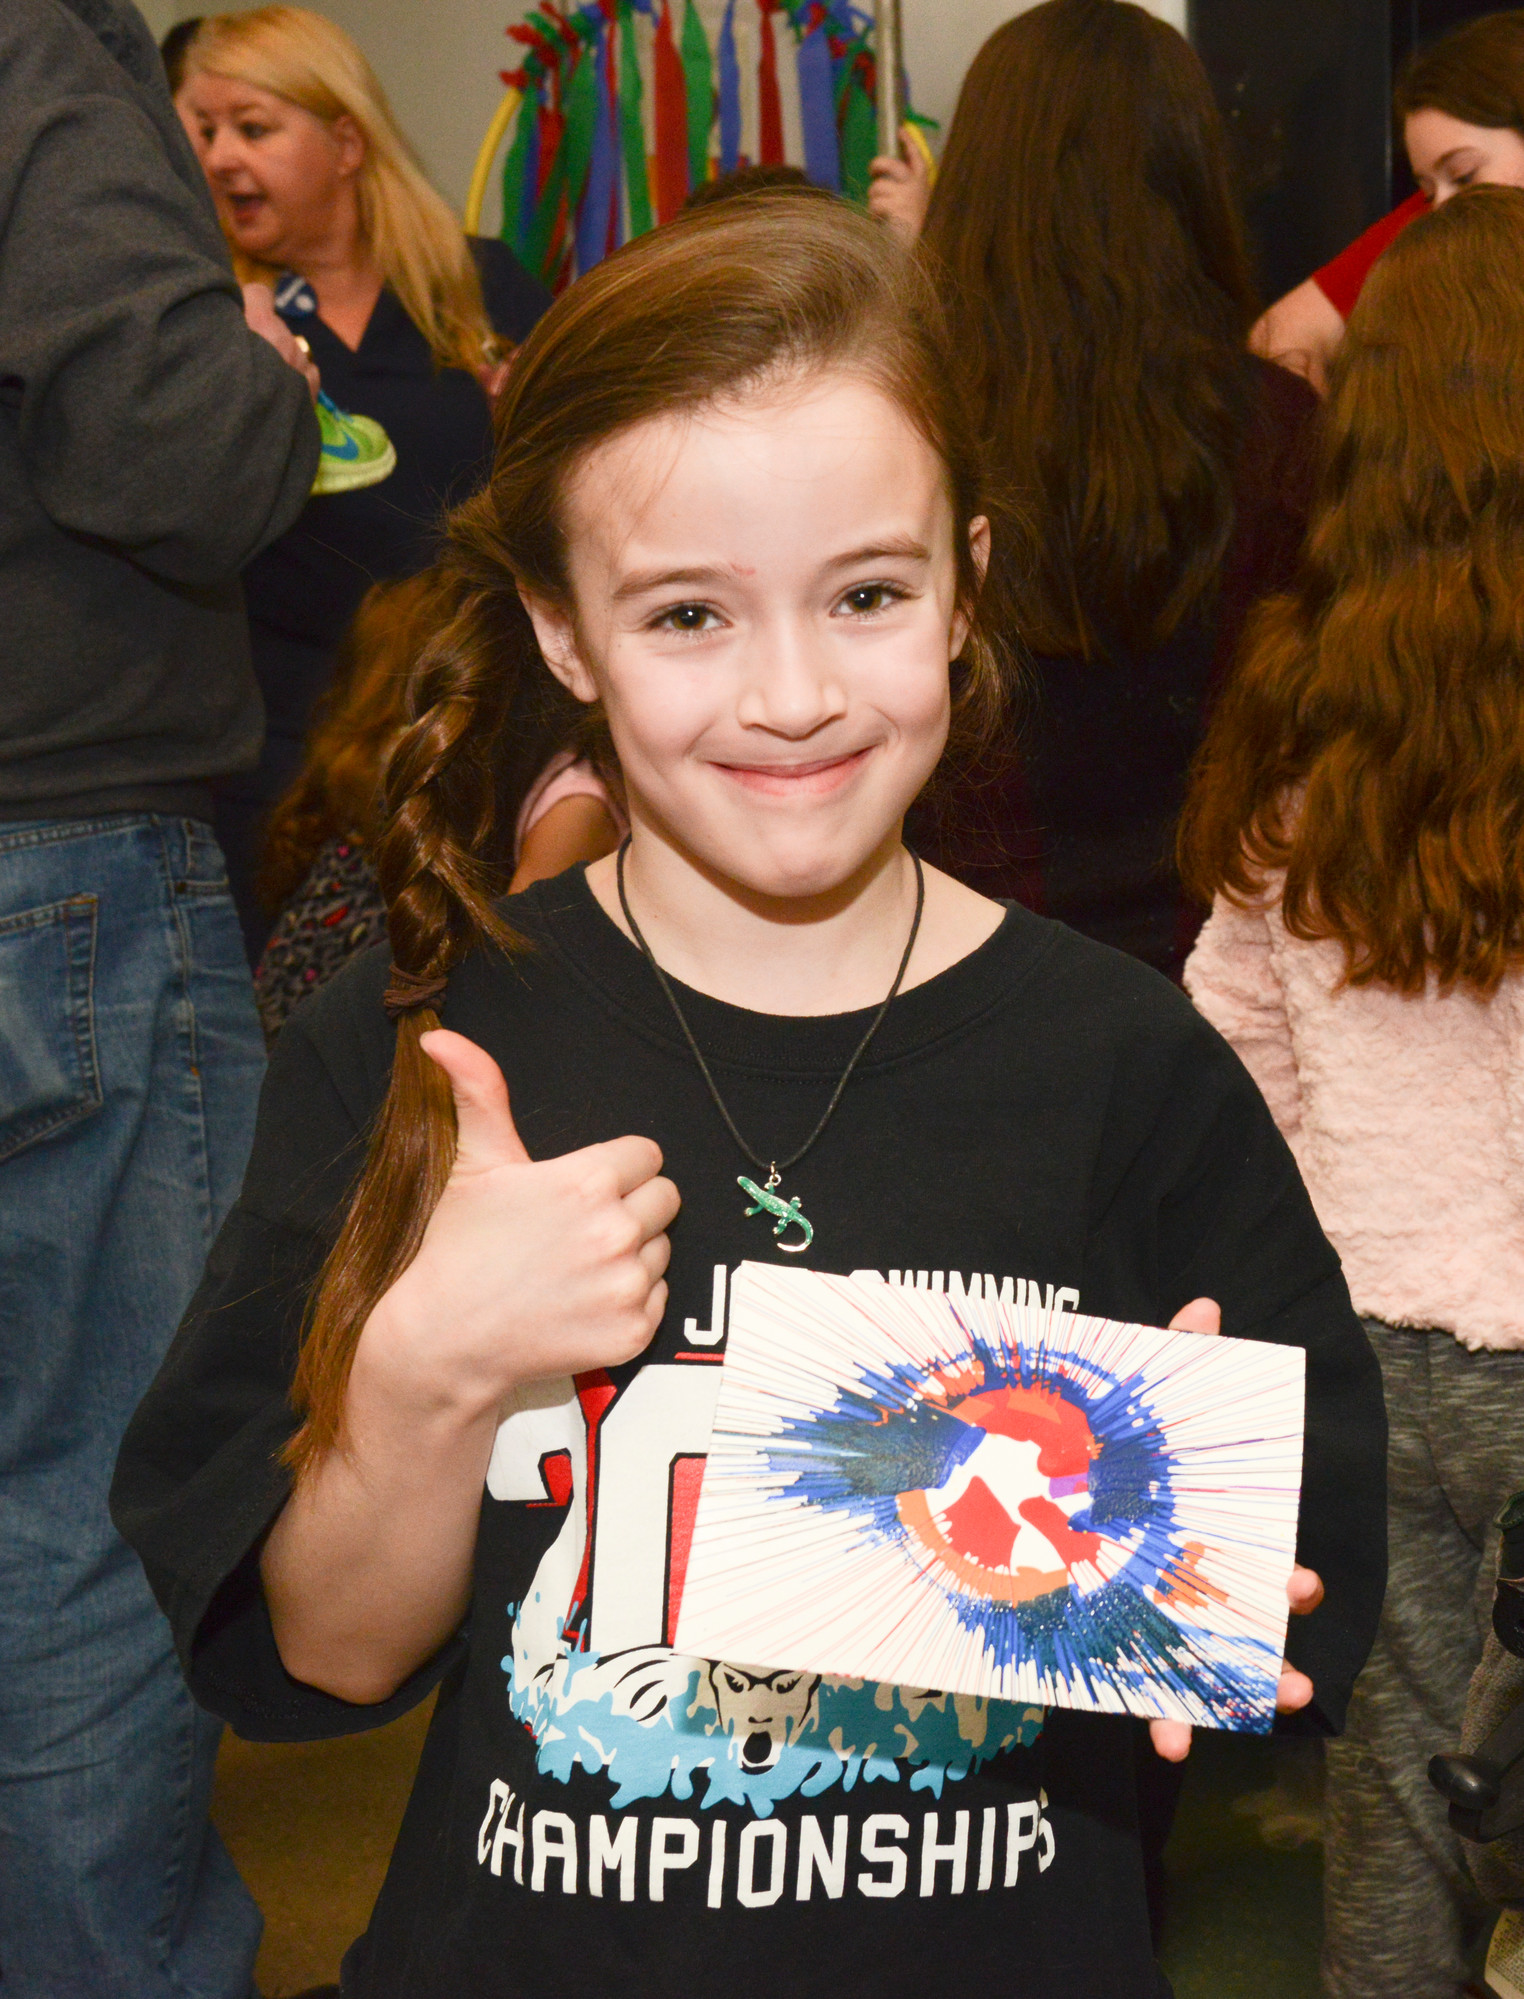 Victoria Brazill, 8, shows her spin art, one of the activities for children at the annual Kiwanis pancake breakfast